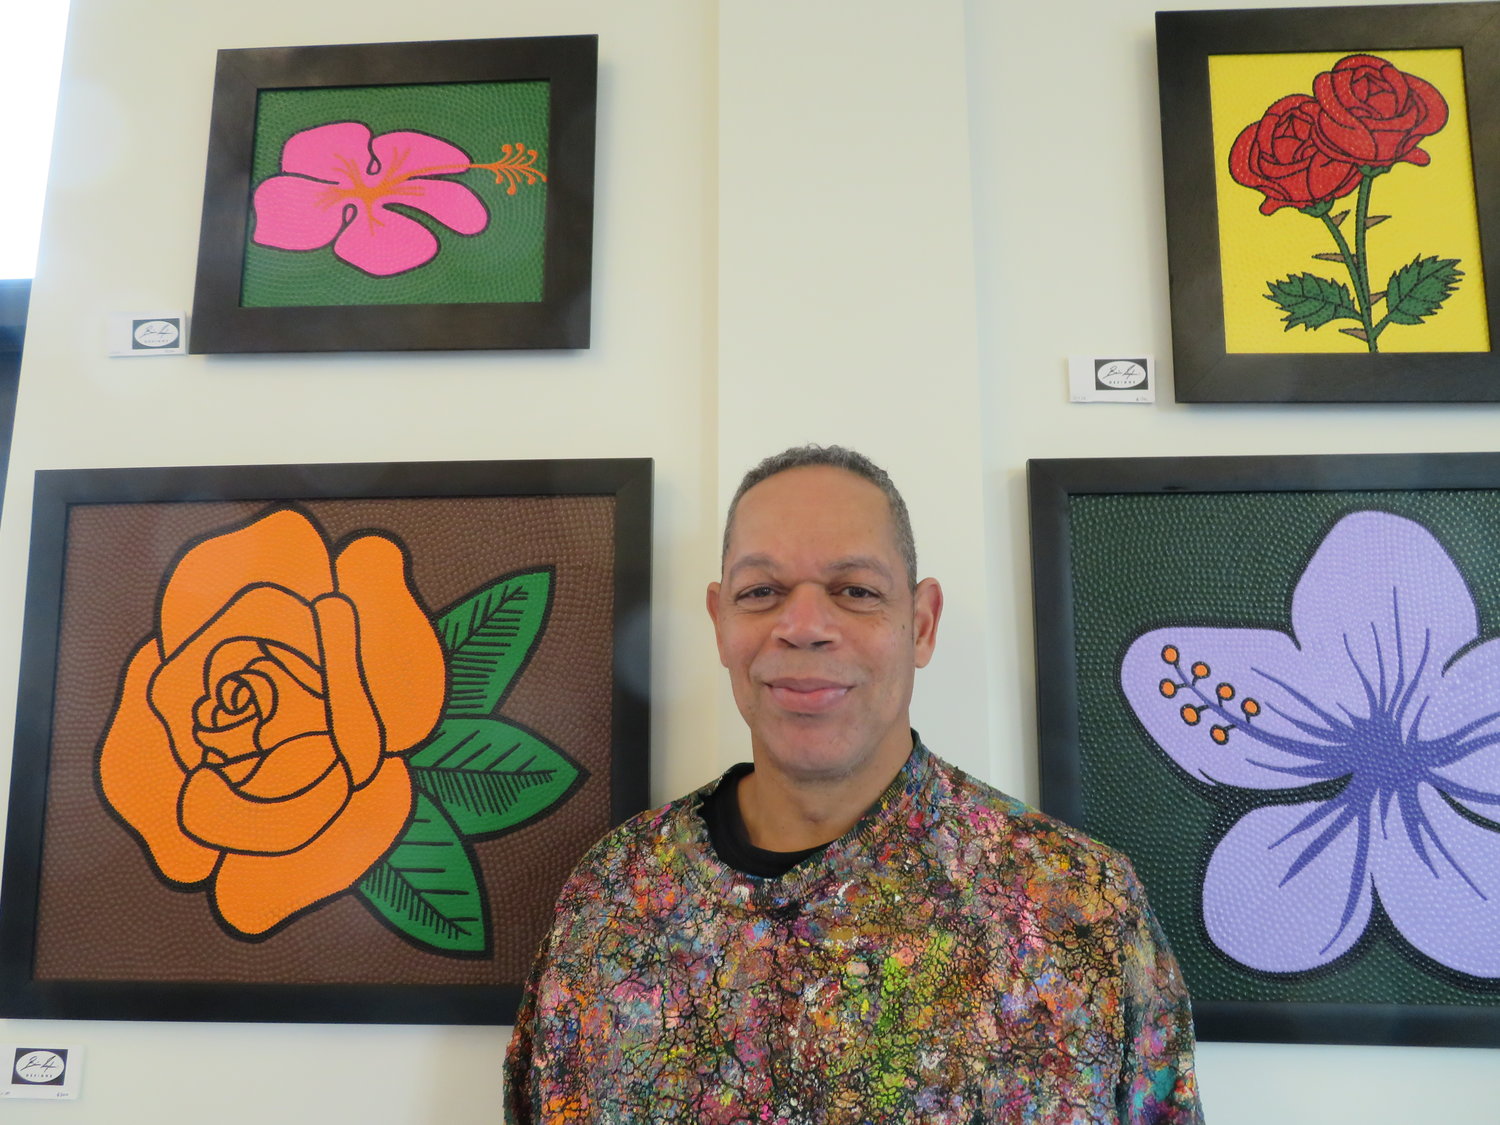 Snyder’s new floral-themed exhibit at Hooked café and bookshop was inspired by the work of Georgia O’Keefe.